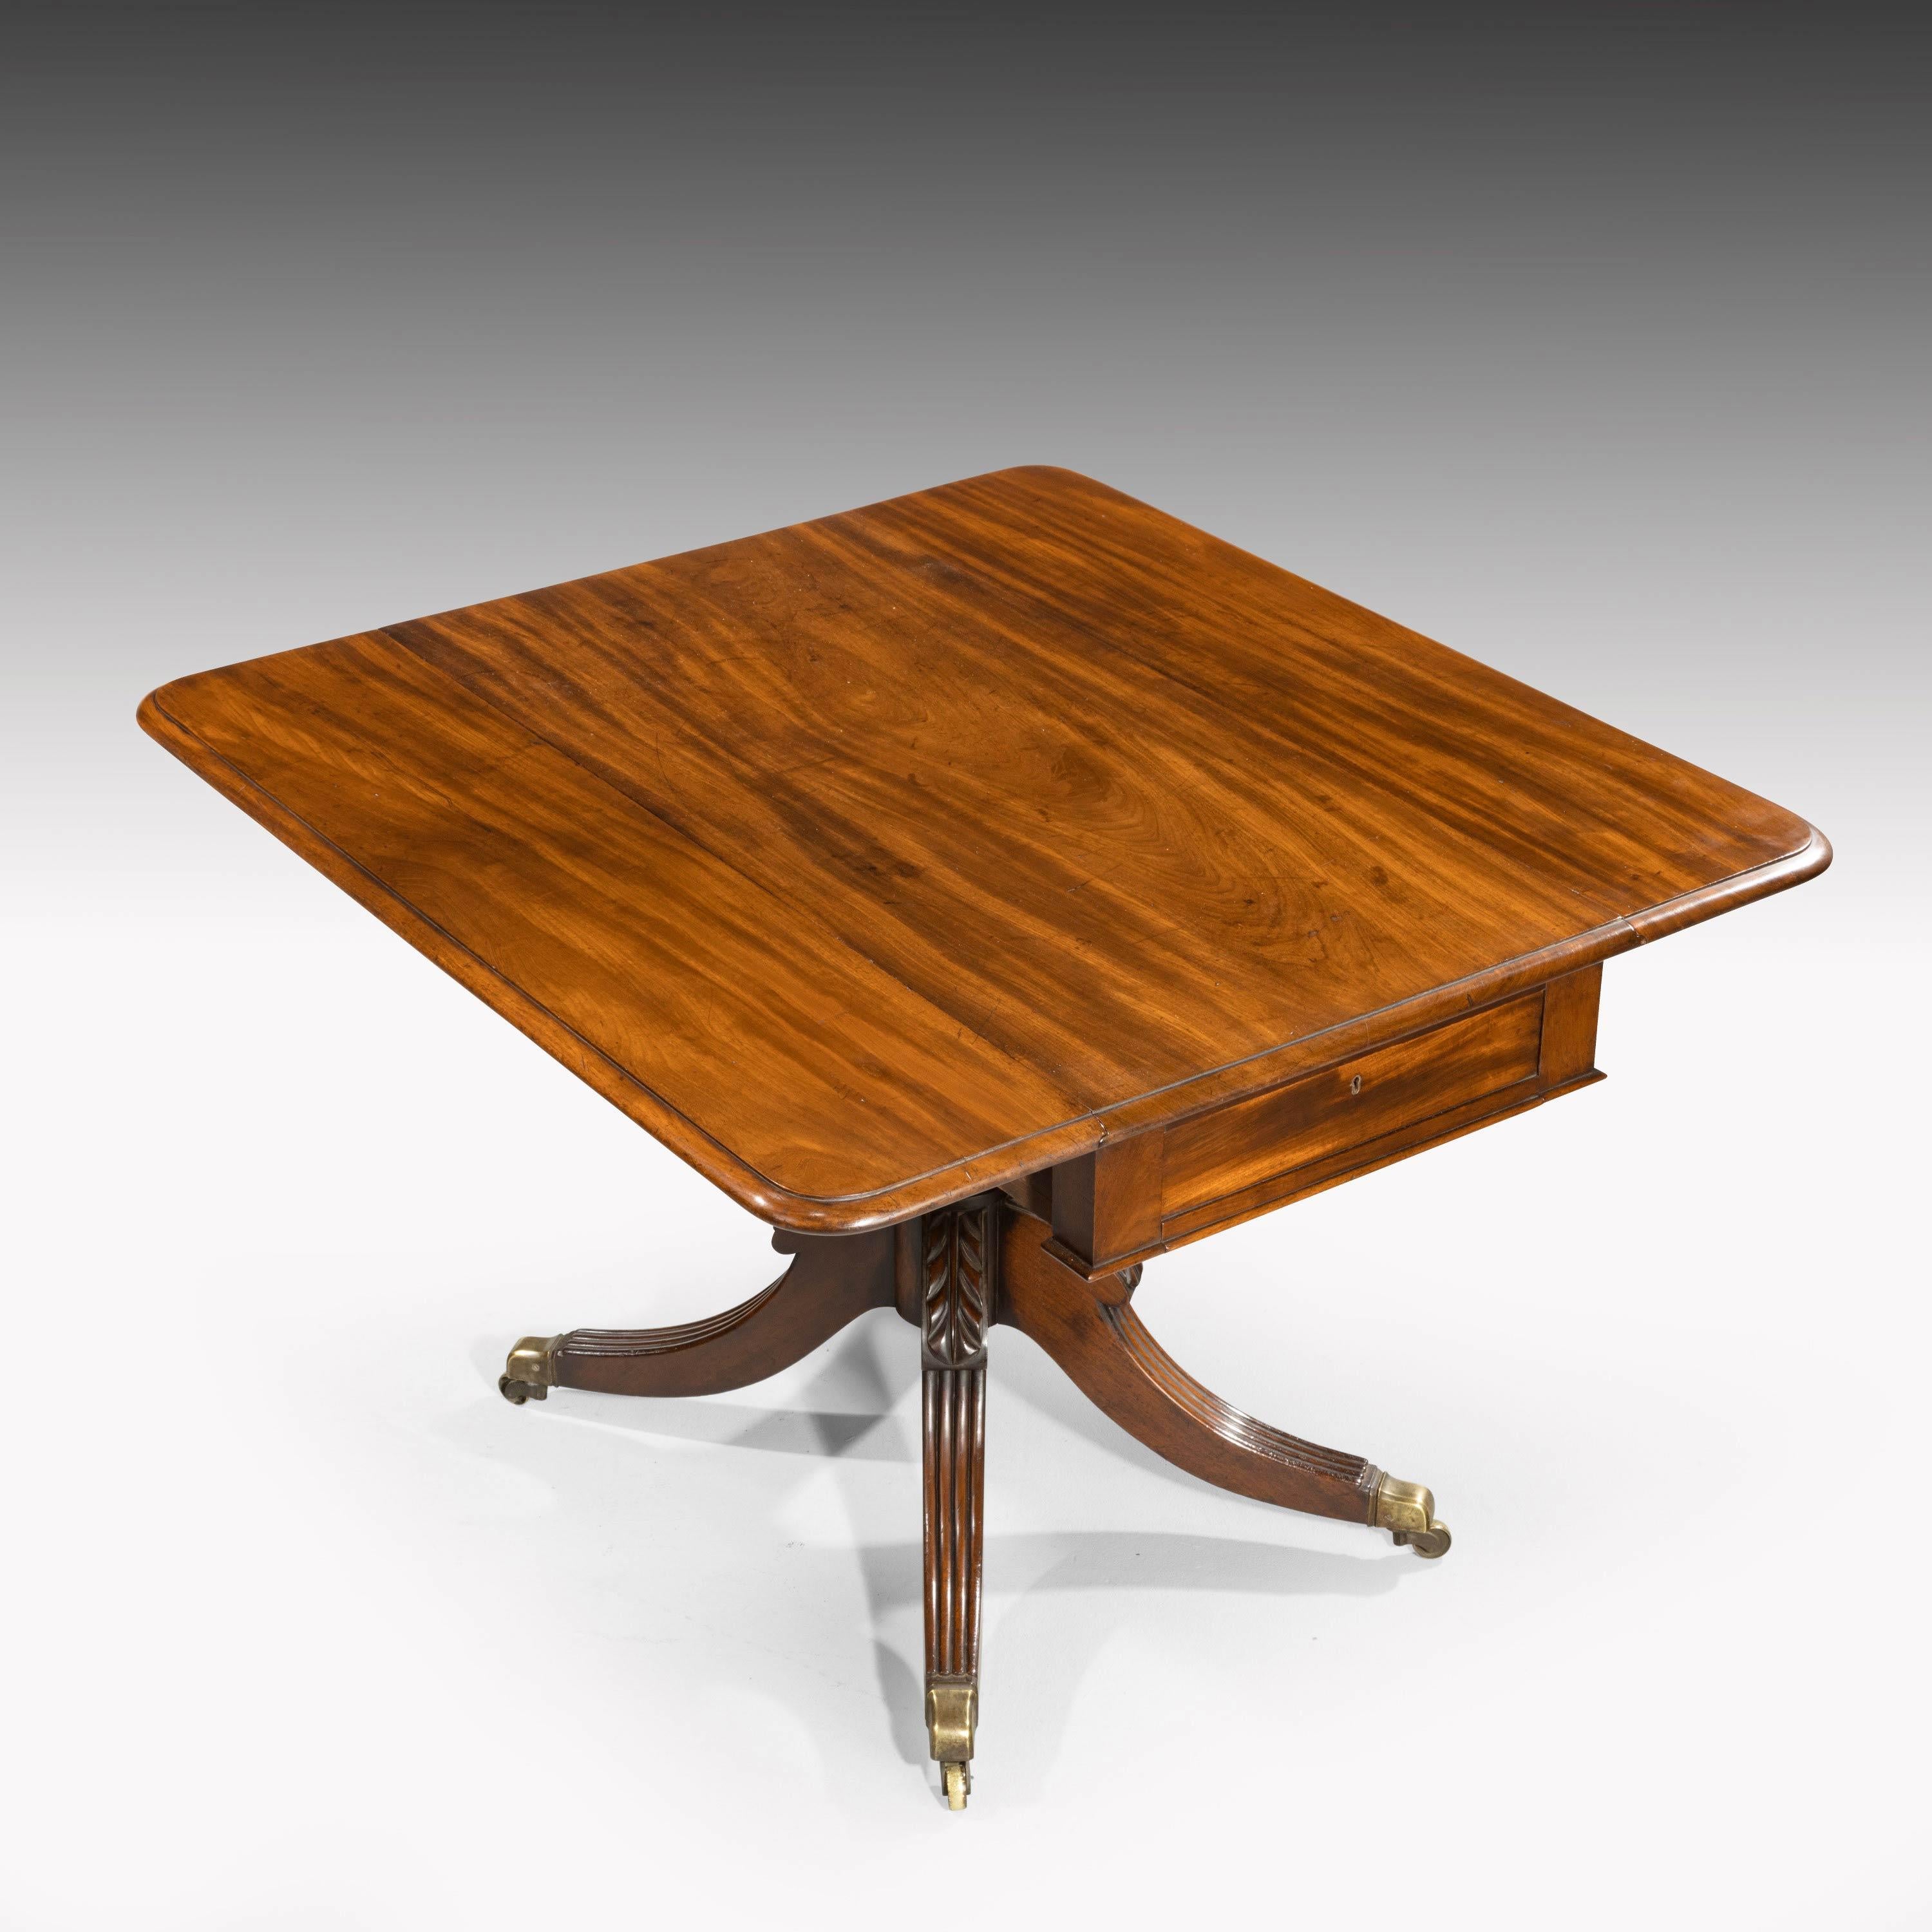 A Regency period mahogany Pembroke table on a well turned centre support. With reeded legs. Retains the original shoes and castors. Excellent overall color and condition.
Closed width is 20.5 inches.